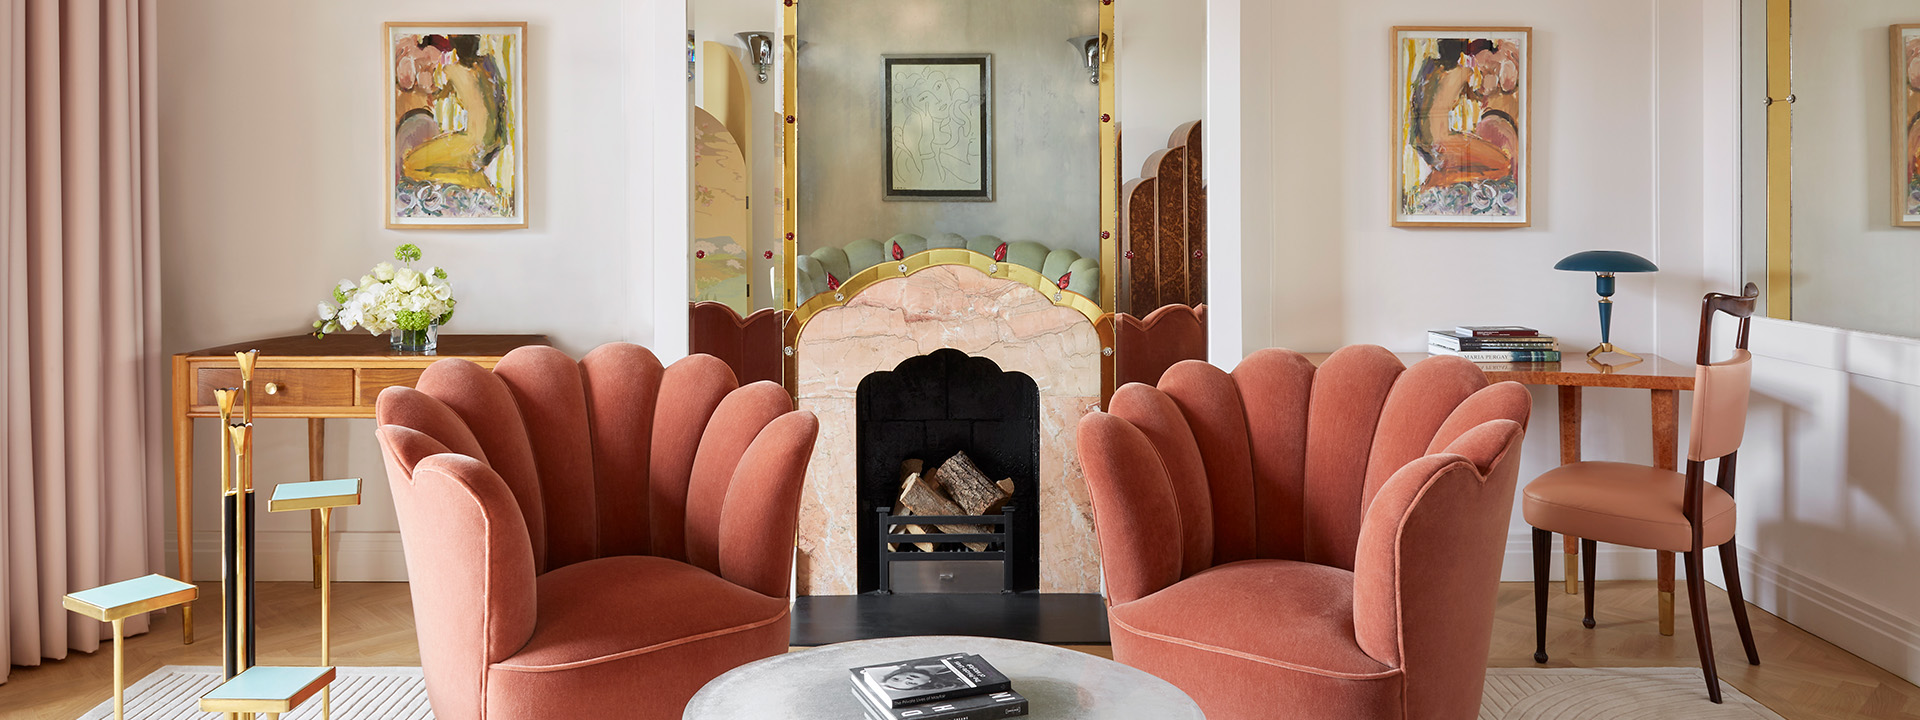 The Mayfair Terrace Suite. An image of a room with two blush coloured chairs with scalloped shape backs. The chairs are arranged between a table, in the background is a mirror and ornate wall. 